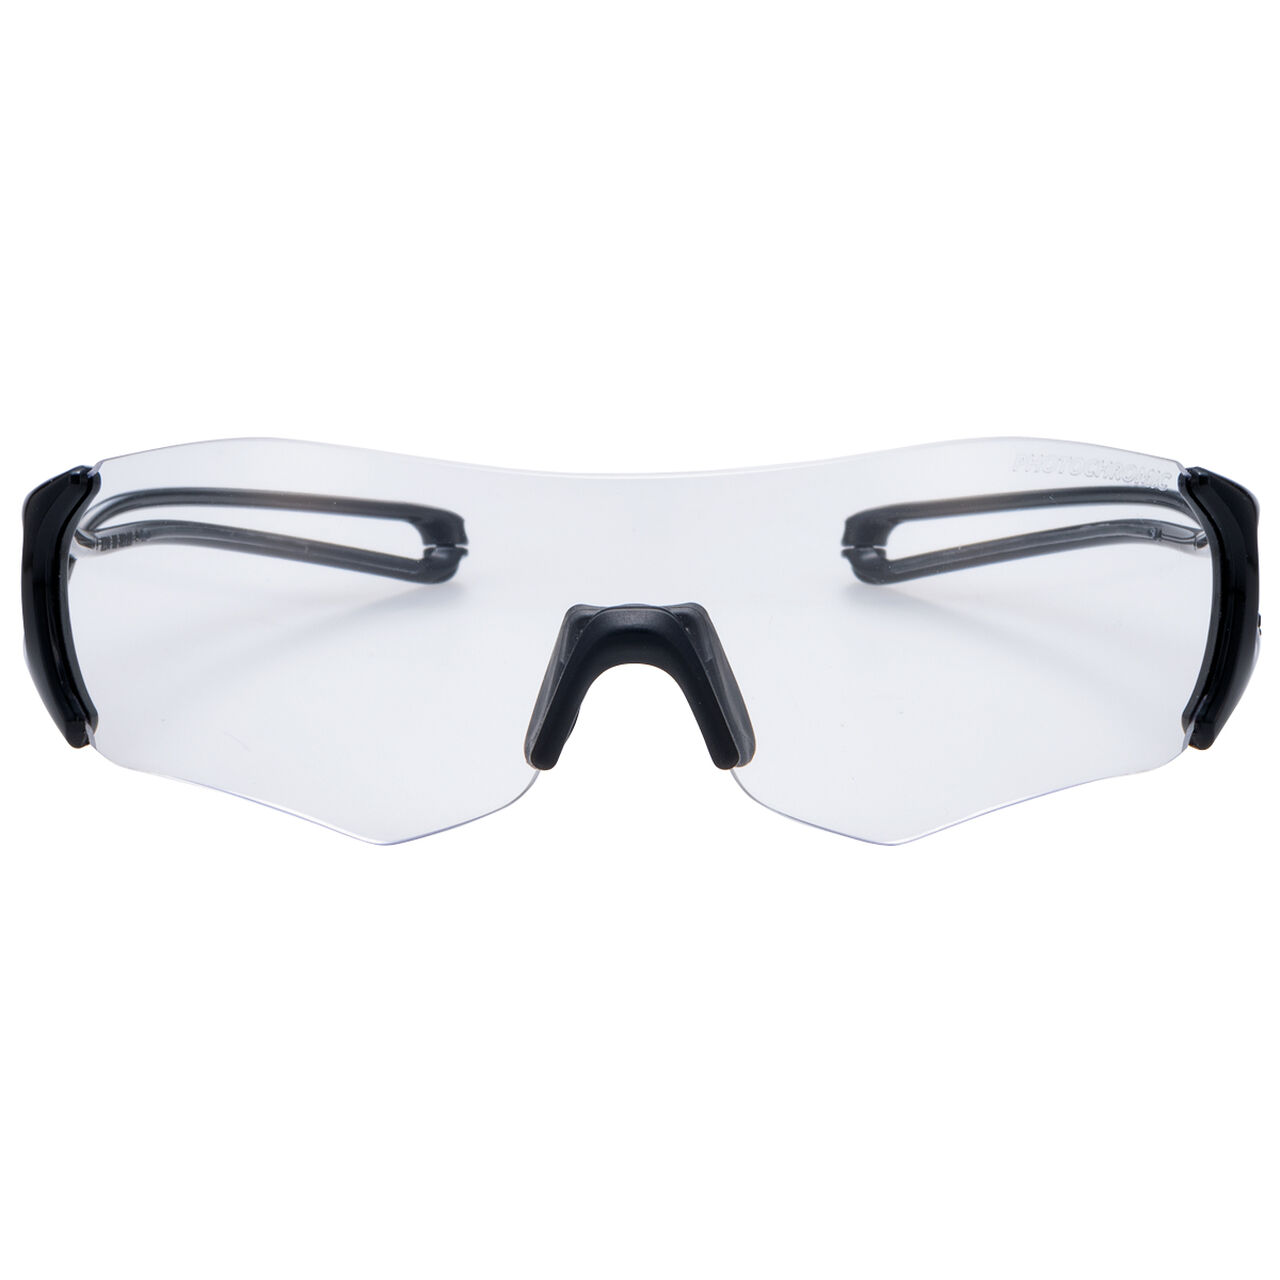 E-NOX EIGHT8 0066 BK Photochromic Clear to Smoke,Opt1, large image number 1